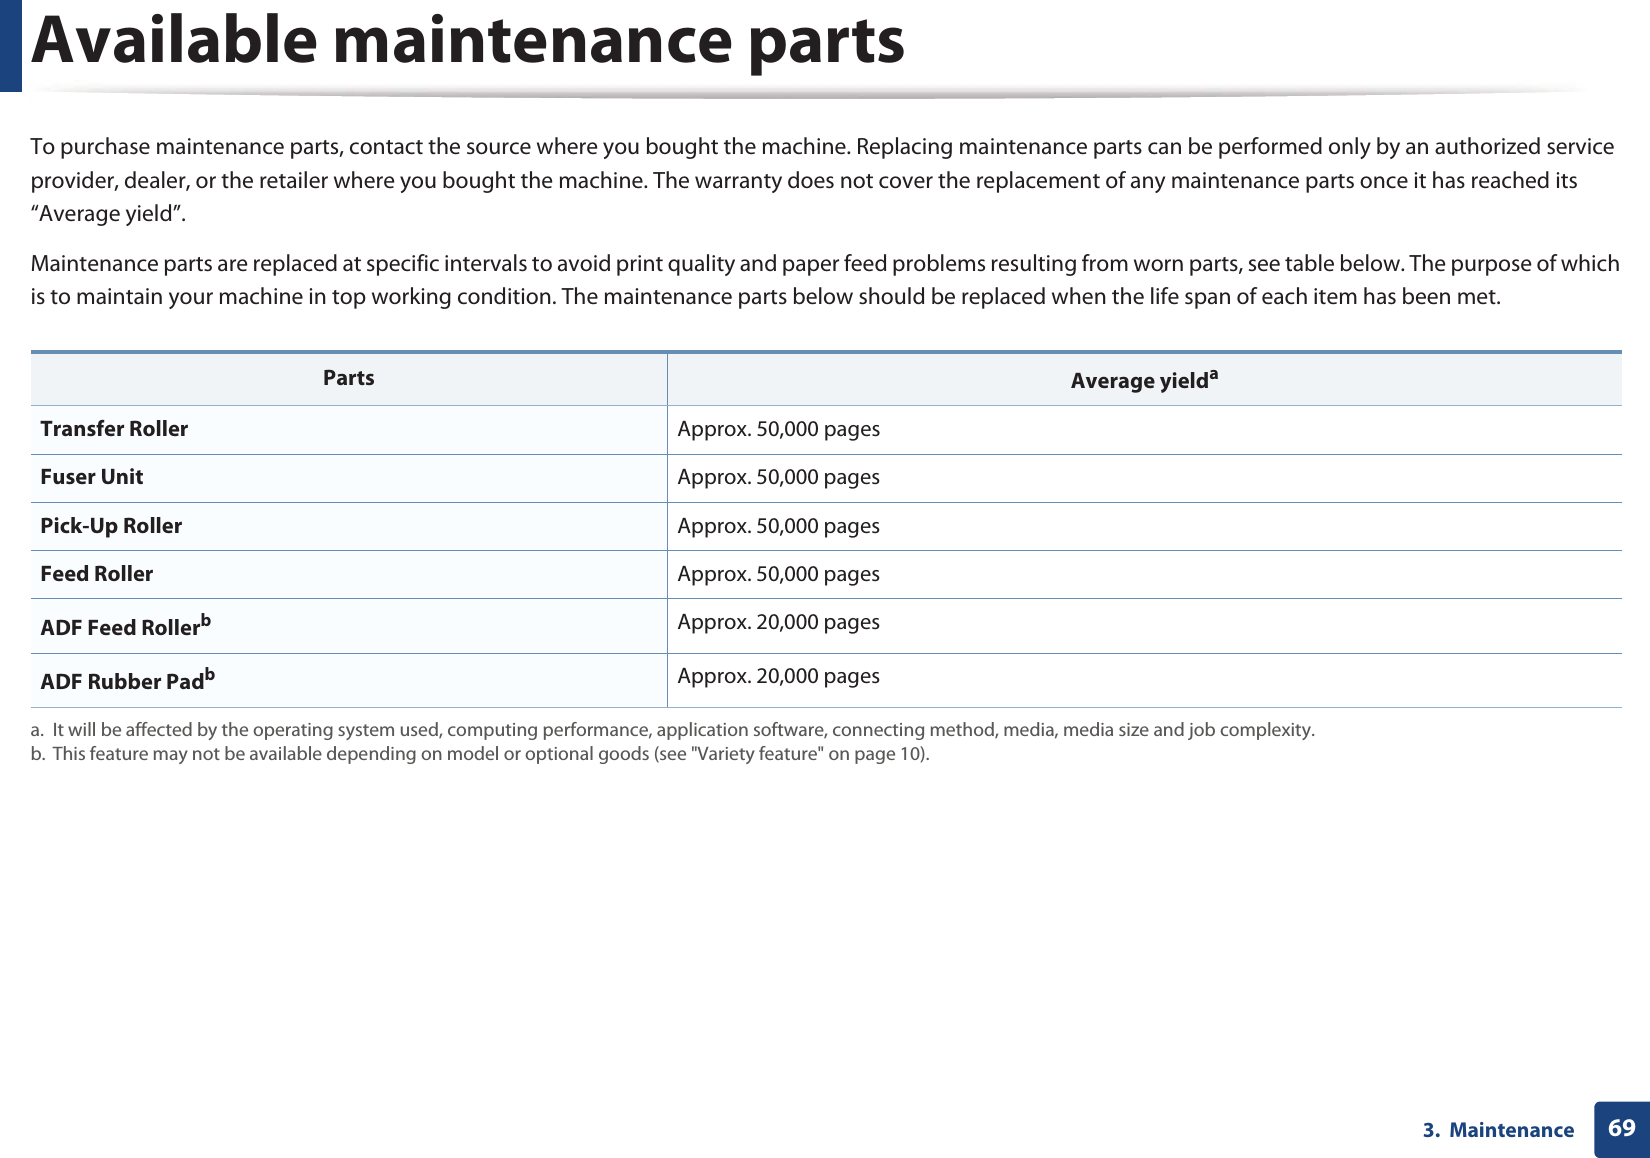 693.  MaintenanceAvailable maintenance partsTo purchase maintenance parts, contact the source where you bought the machine. Replacing maintenance parts can be performed only by an authorized service provider, dealer, or the retailer where you bought the machine. The warranty does not cover the replacement of any maintenance parts once it has reached its “Average yield”.Maintenance parts are replaced at specific intervals to avoid print quality and paper feed problems resulting from worn parts, see table below. The purpose of which is to maintain your machine in top working condition. The maintenance parts below should be replaced when the life span of each item has been met.Parts Average yieldaa. It will be affected by the operating system used, computing performance, application software, connecting method, media, media size and job complexity.Transfer Roller Approx. 50,000 pages Fuser Unit Approx. 50,000 pagesPick-Up Roller Approx. 50,000 pagesFeed Roller Approx. 50,000 pagesADF Feed Rollerbb. This feature may not be available depending on model or optional goods (see &quot;Variety feature&quot; on page 10).Approx. 20,000 pagesADF Rubber PadbApprox. 20,000 pages